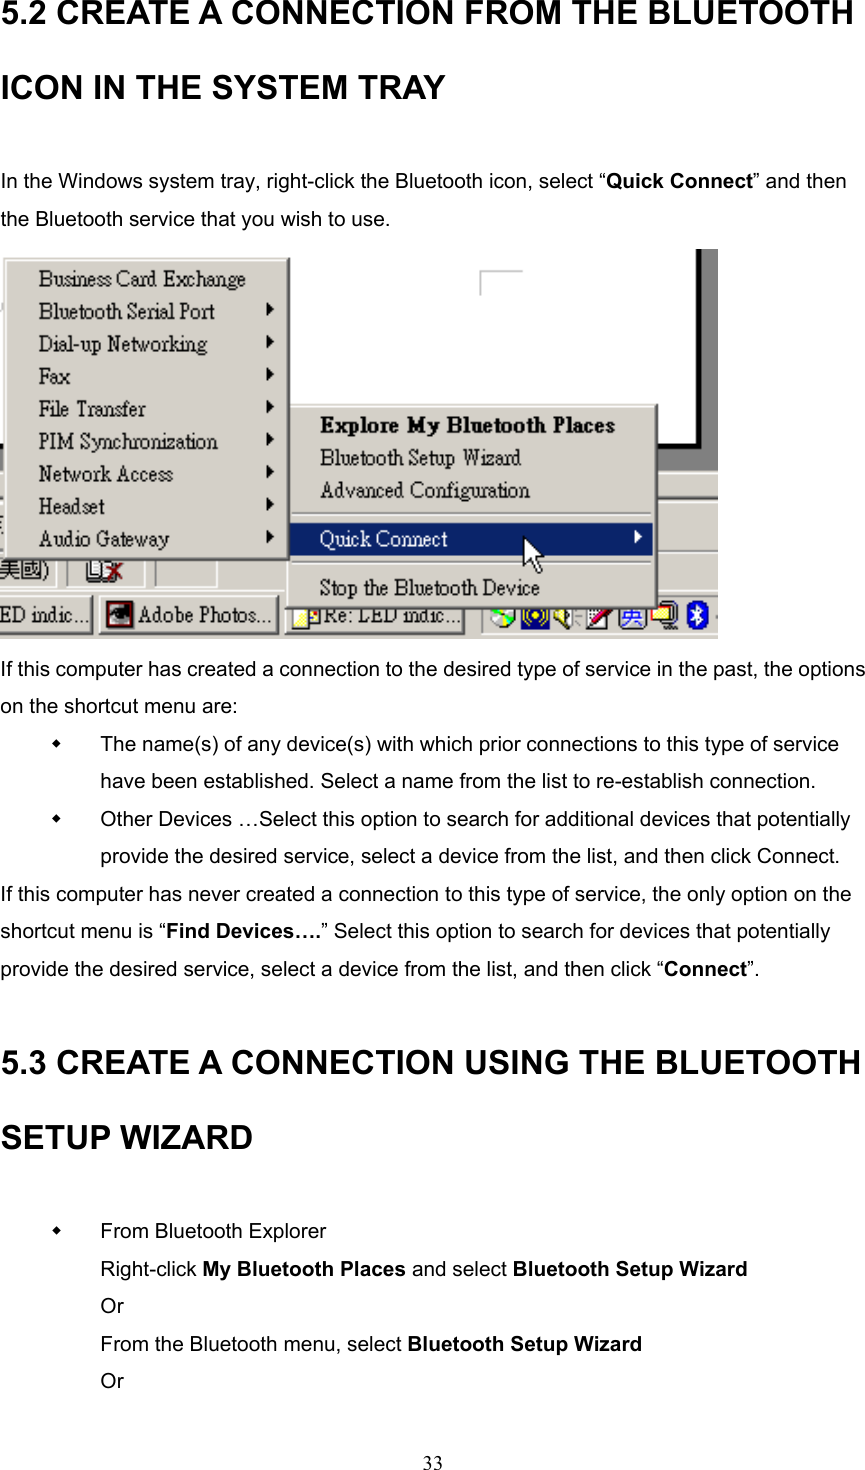  33 5.2 CREATE A CONNECTION FROM THE BLUETOOTH ICON IN THE SYSTEM TRAY  In the Windows system tray, right-click the Bluetooth icon, select “Quick Connect” and then the Bluetooth service that you wish to use.    If this computer has created a connection to the desired type of service in the past, the options on the shortcut menu are:   The name(s) of any device(s) with which prior connections to this type of service have been established. Select a name from the list to re-establish connection.   Other Devices …Select this option to search for additional devices that potentially provide the desired service, select a device from the list, and then click Connect. If this computer has never created a connection to this type of service, the only option on the shortcut menu is “Find Devices….” Select this option to search for devices that potentially provide the desired service, select a device from the list, and then click “Connect”.  5.3 CREATE A CONNECTION USING THE BLUETOOTH SETUP WIZARD    From Bluetooth Explorer Right-click My Bluetooth Places and select Bluetooth Setup Wizard Or From the Bluetooth menu, select Bluetooth Setup Wizard Or  